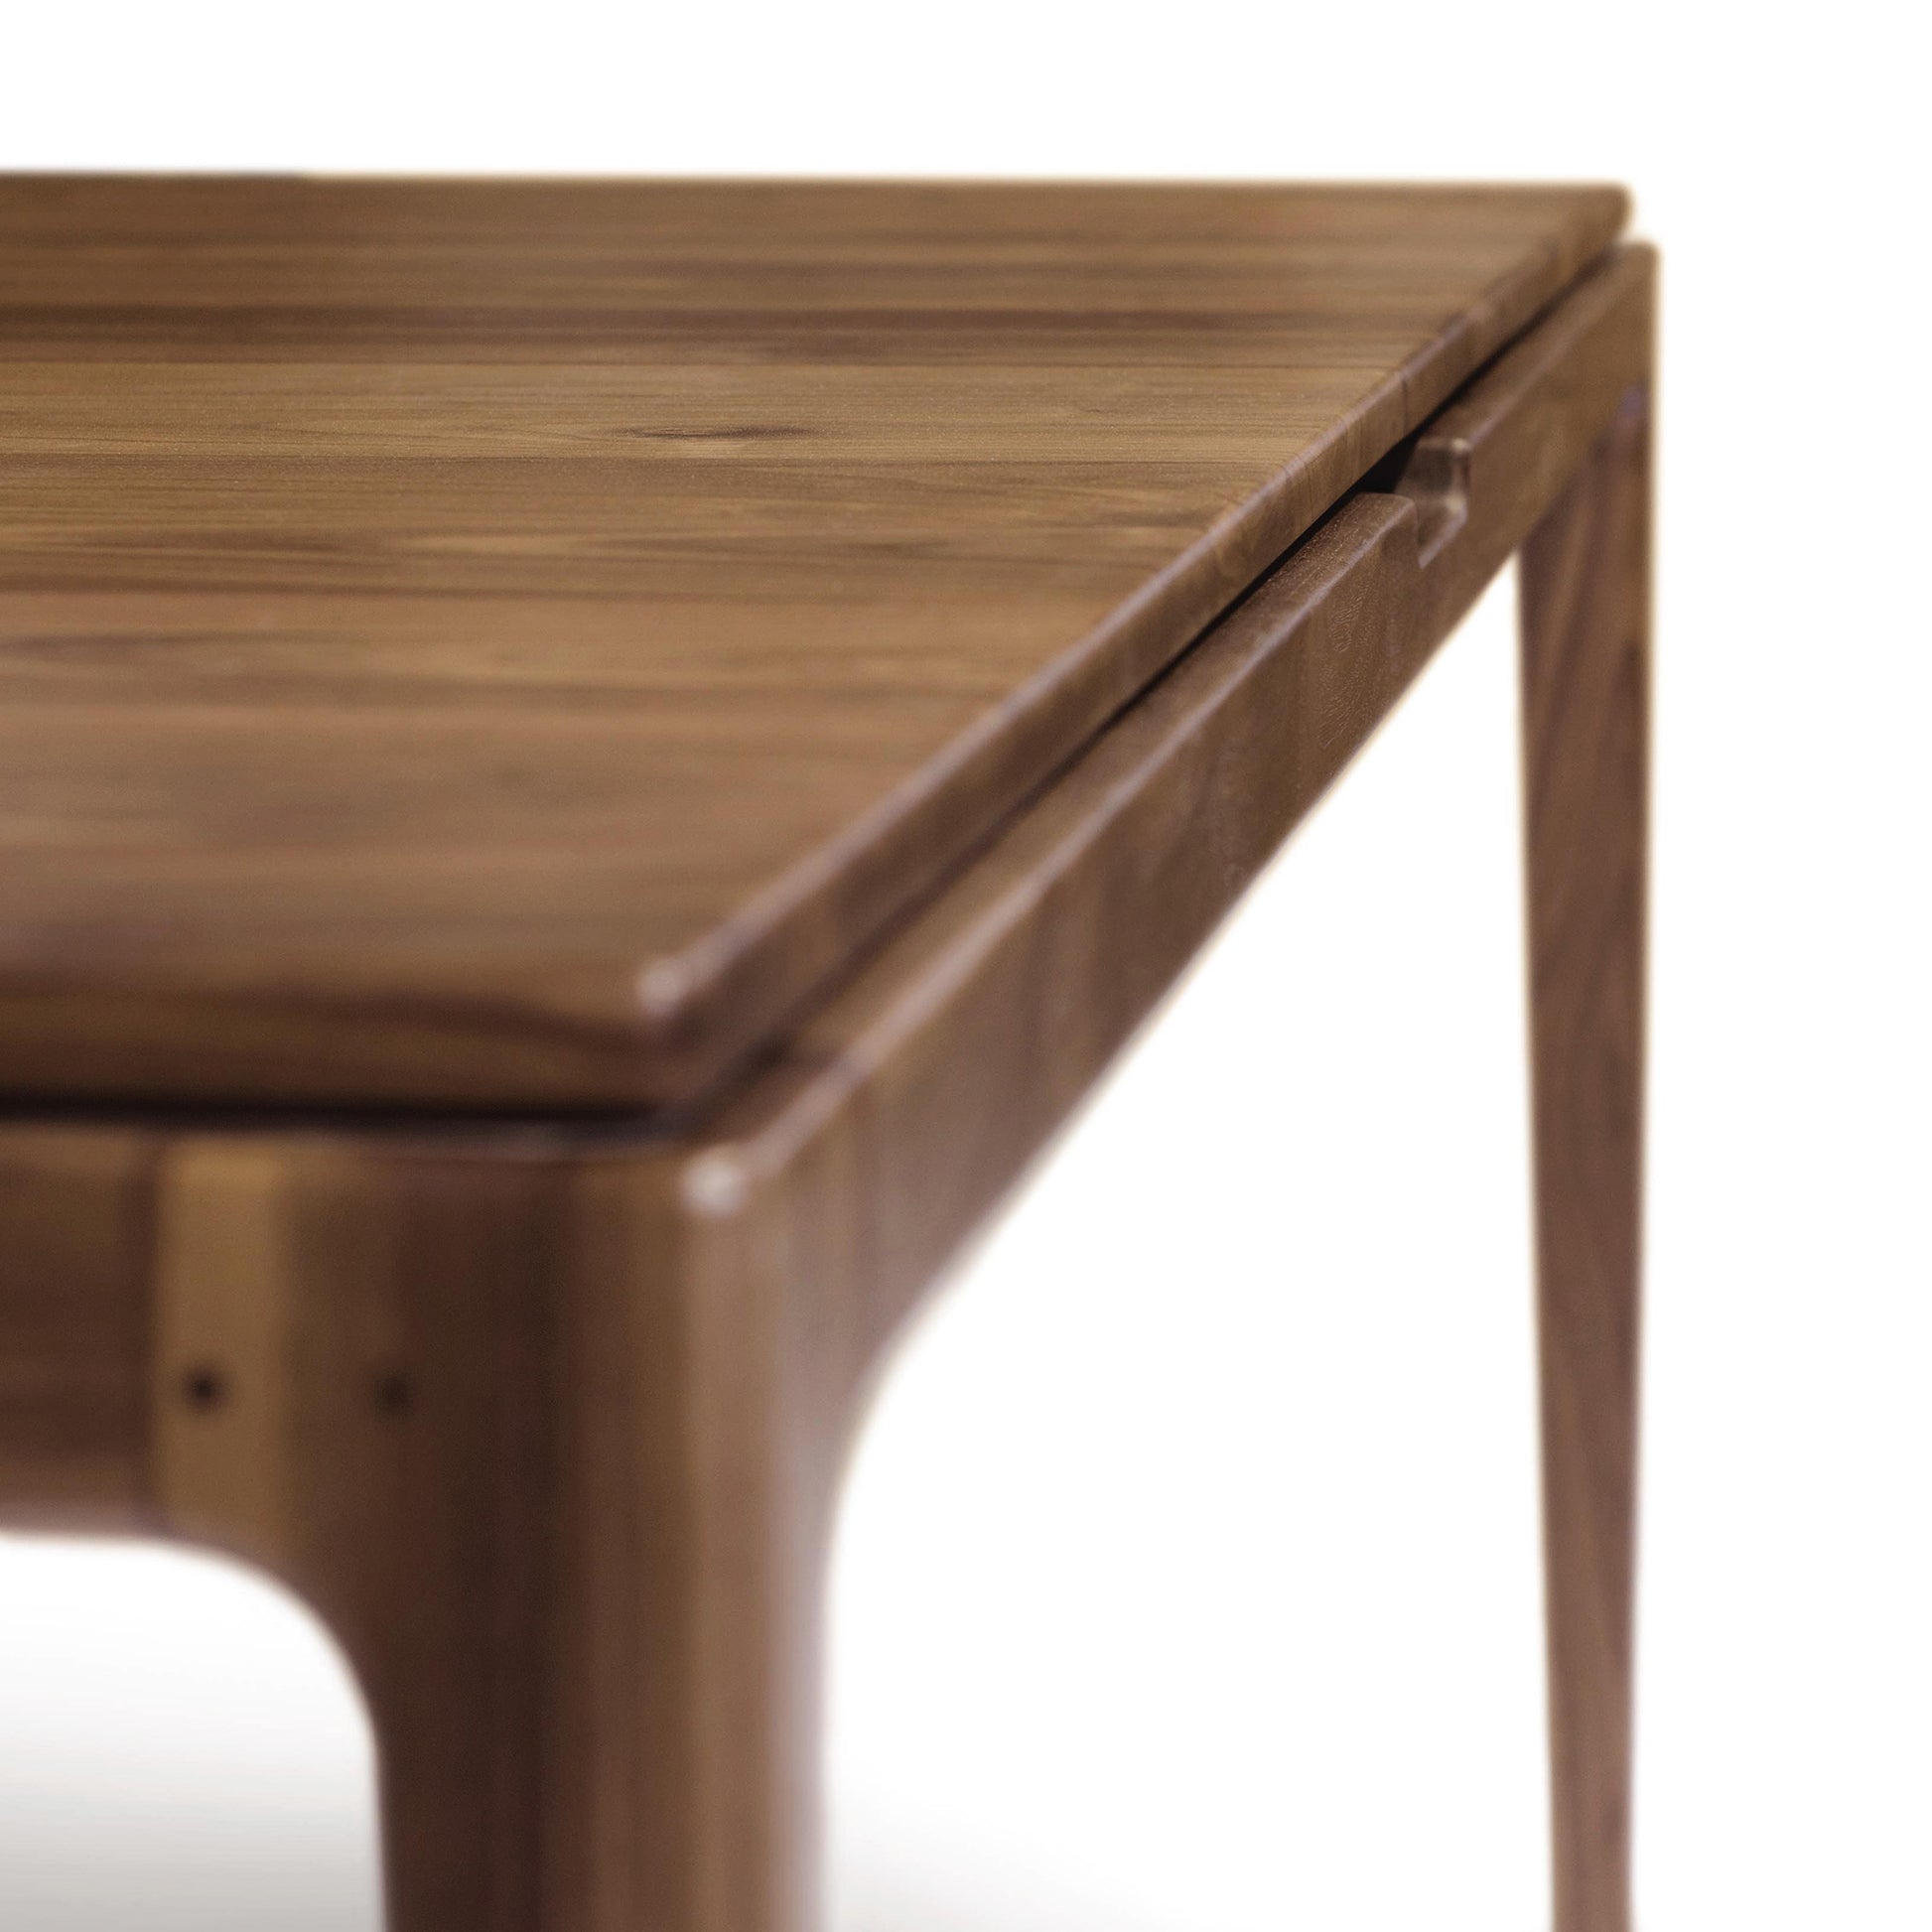 Close-up of a Copeland Furniture Lisse Extension Dining Table corner showing the grain and texture of the wood with a blurred background.